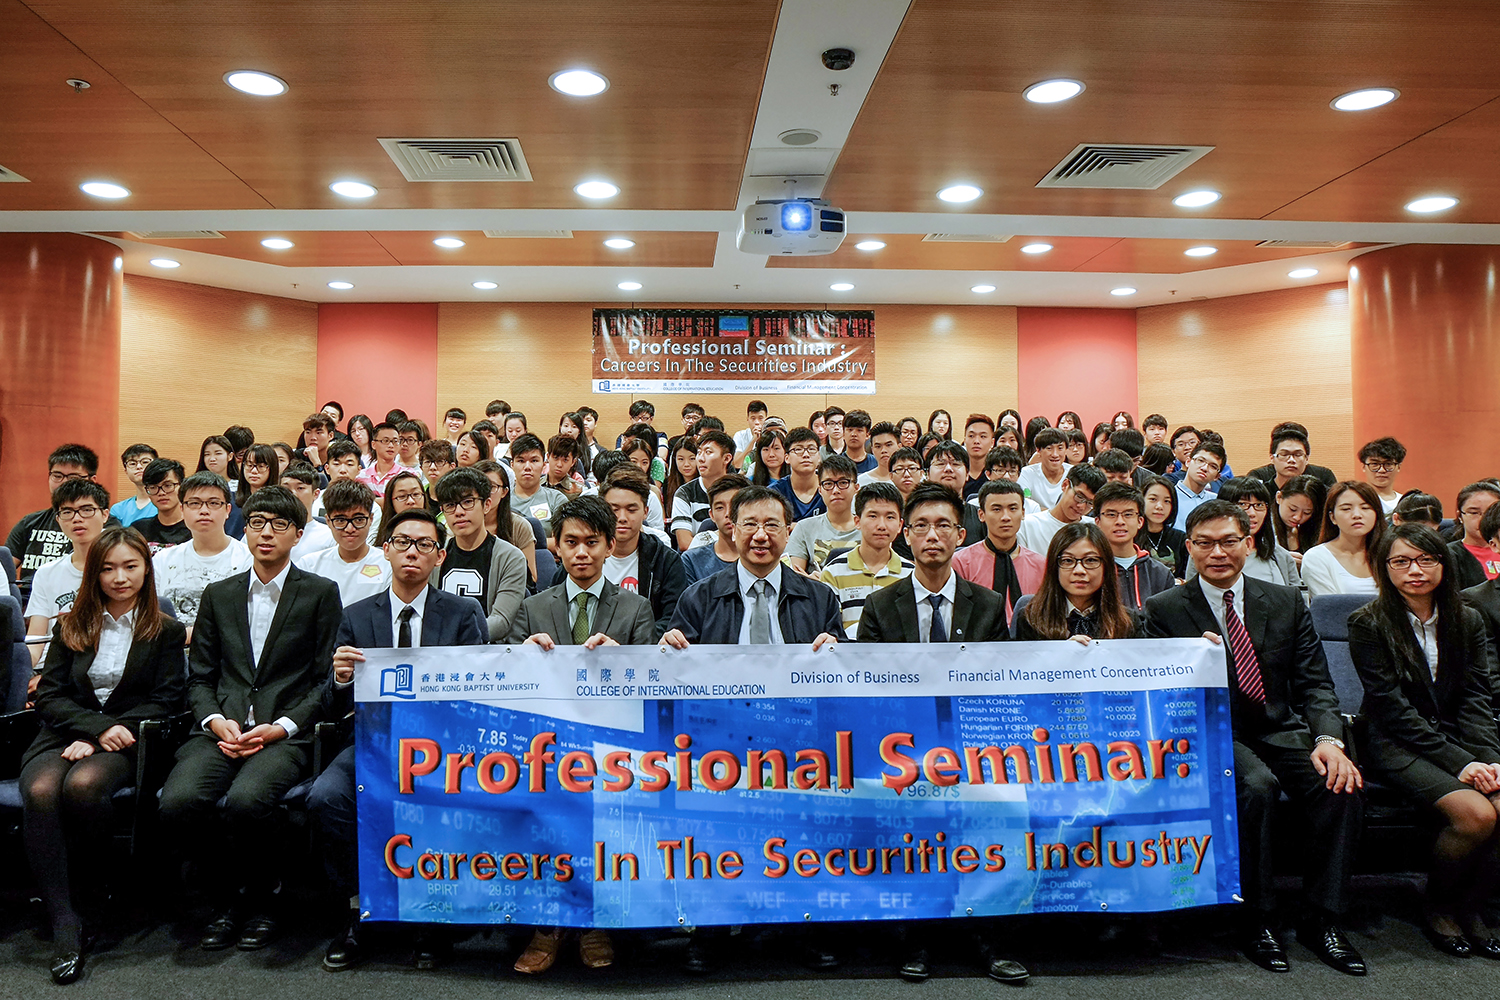 Over 150 students participated in the Professional Seminar and i-plan Stage I (Level 1) Training Session.